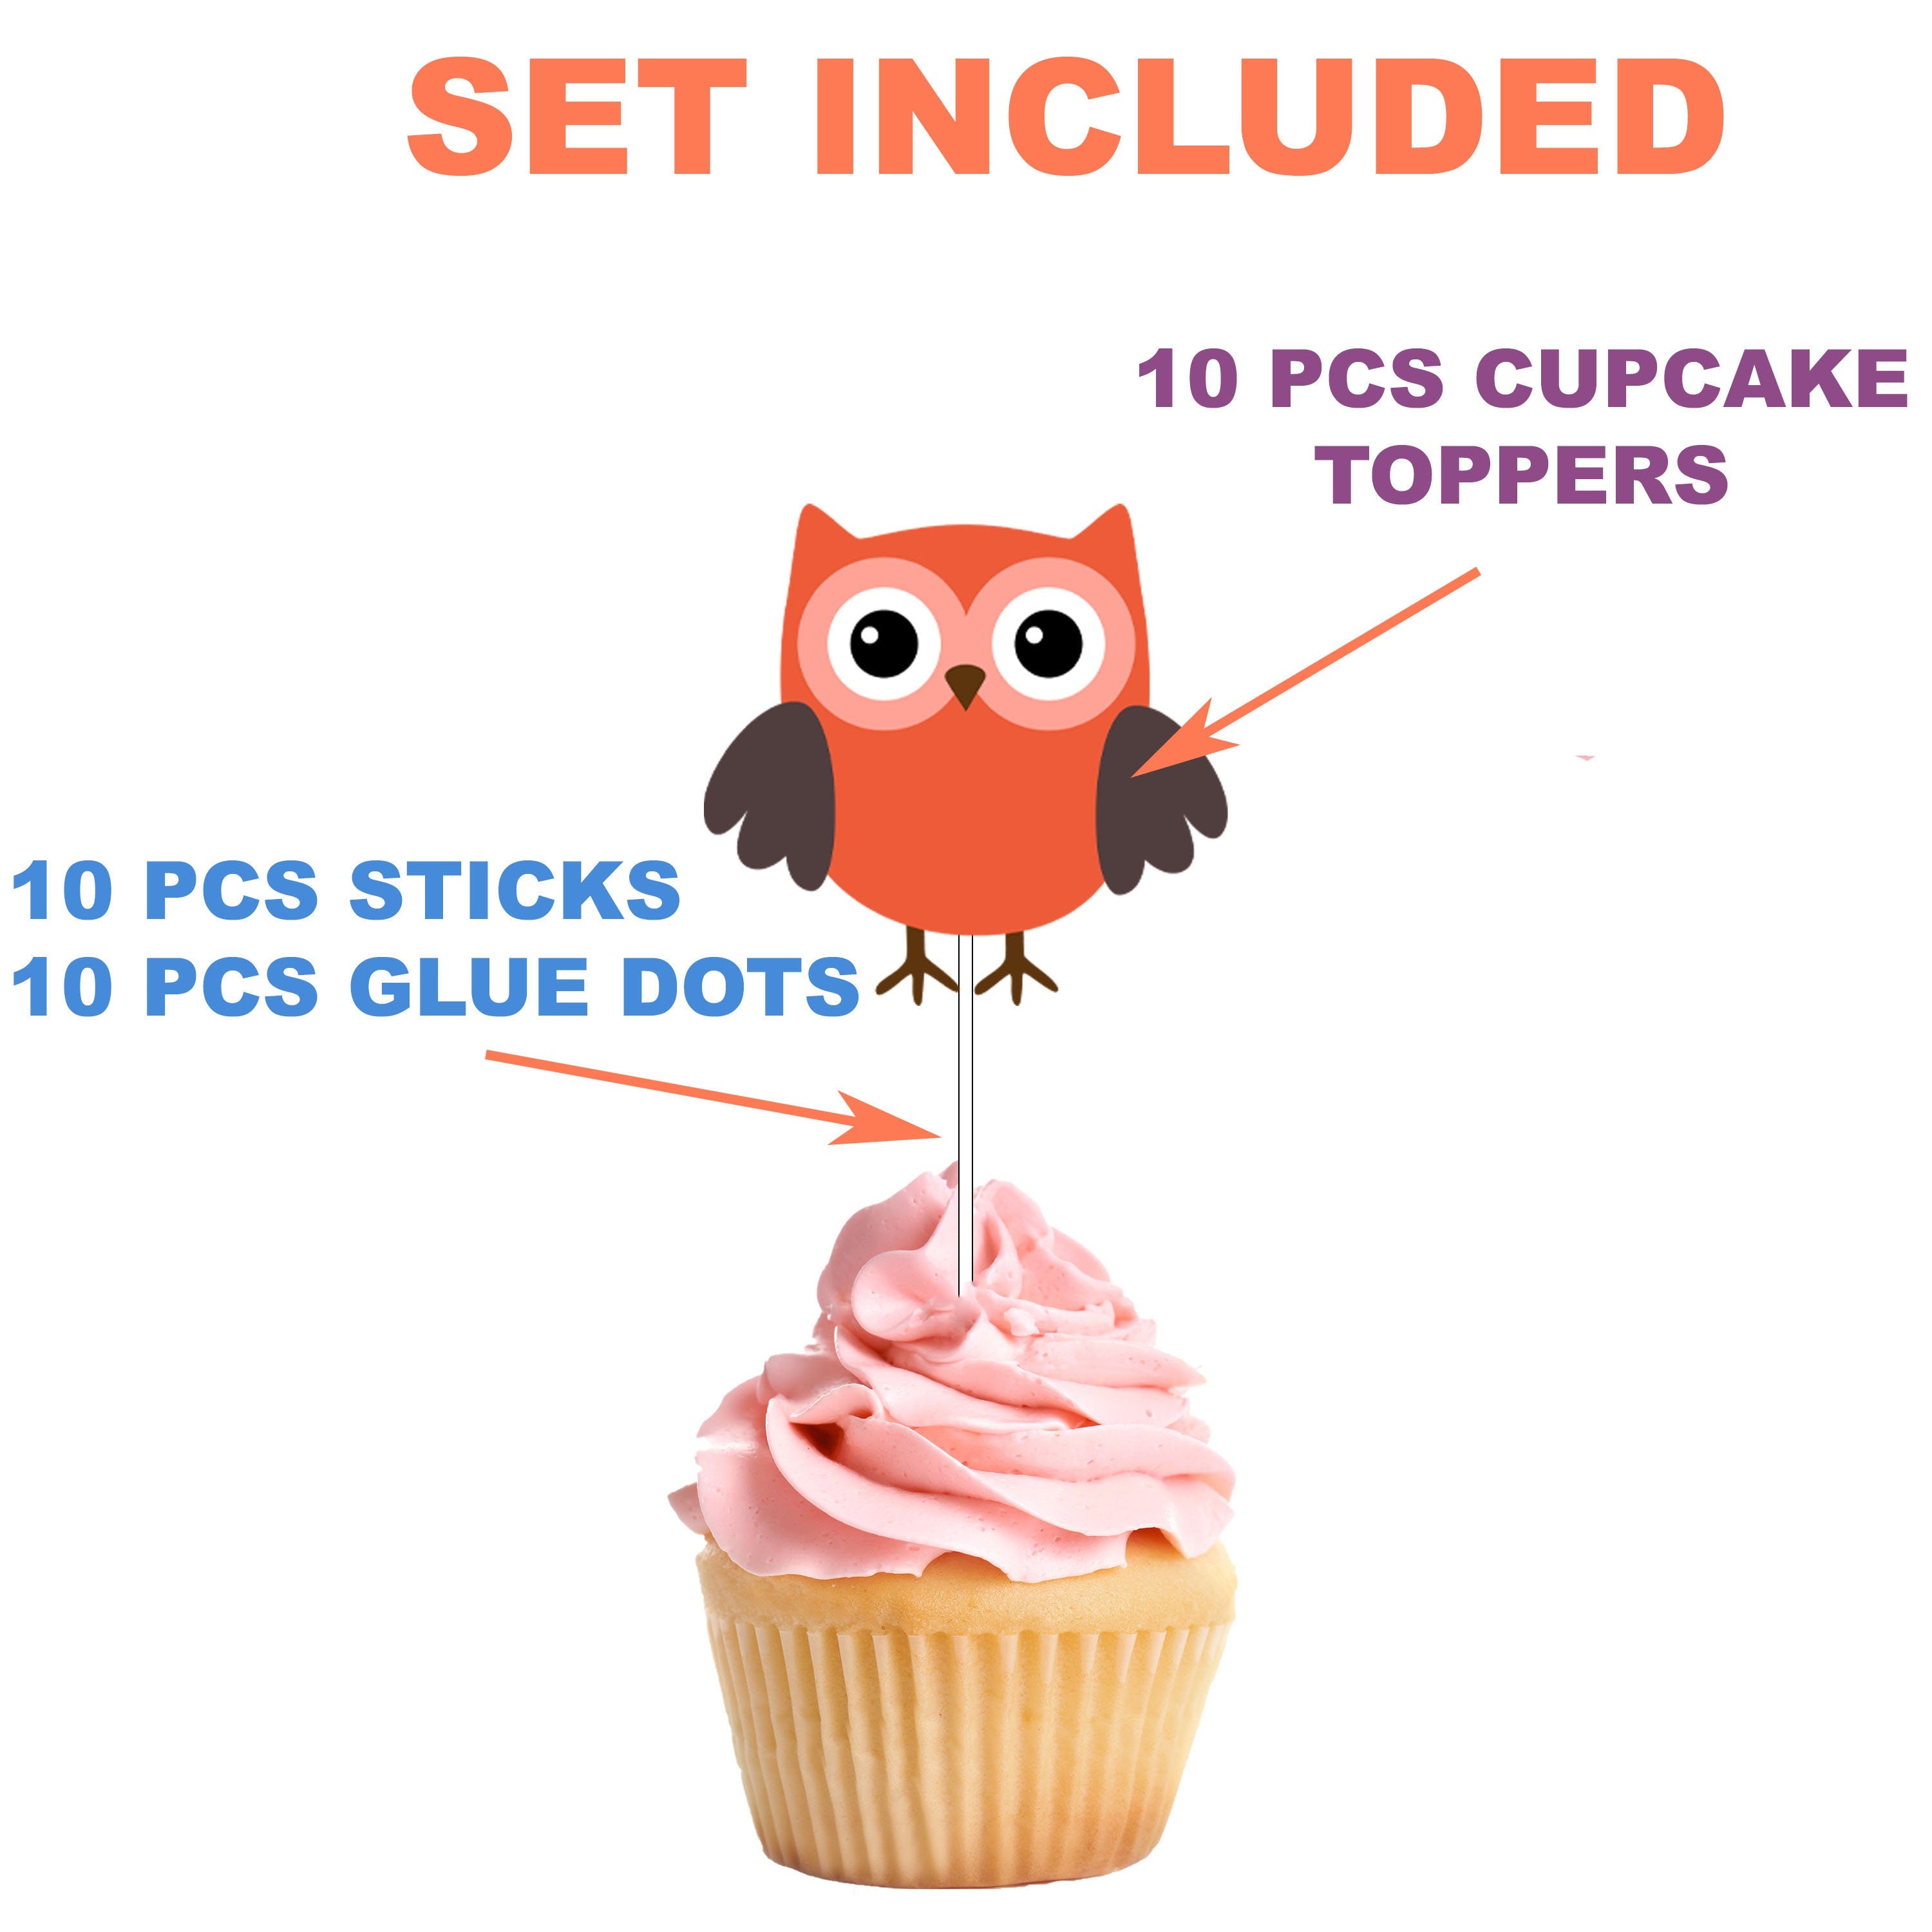 Whimsical Owl Cupcake Toppers - Perfect for Adding a Wise Touch to Your Sweet Celebrations!